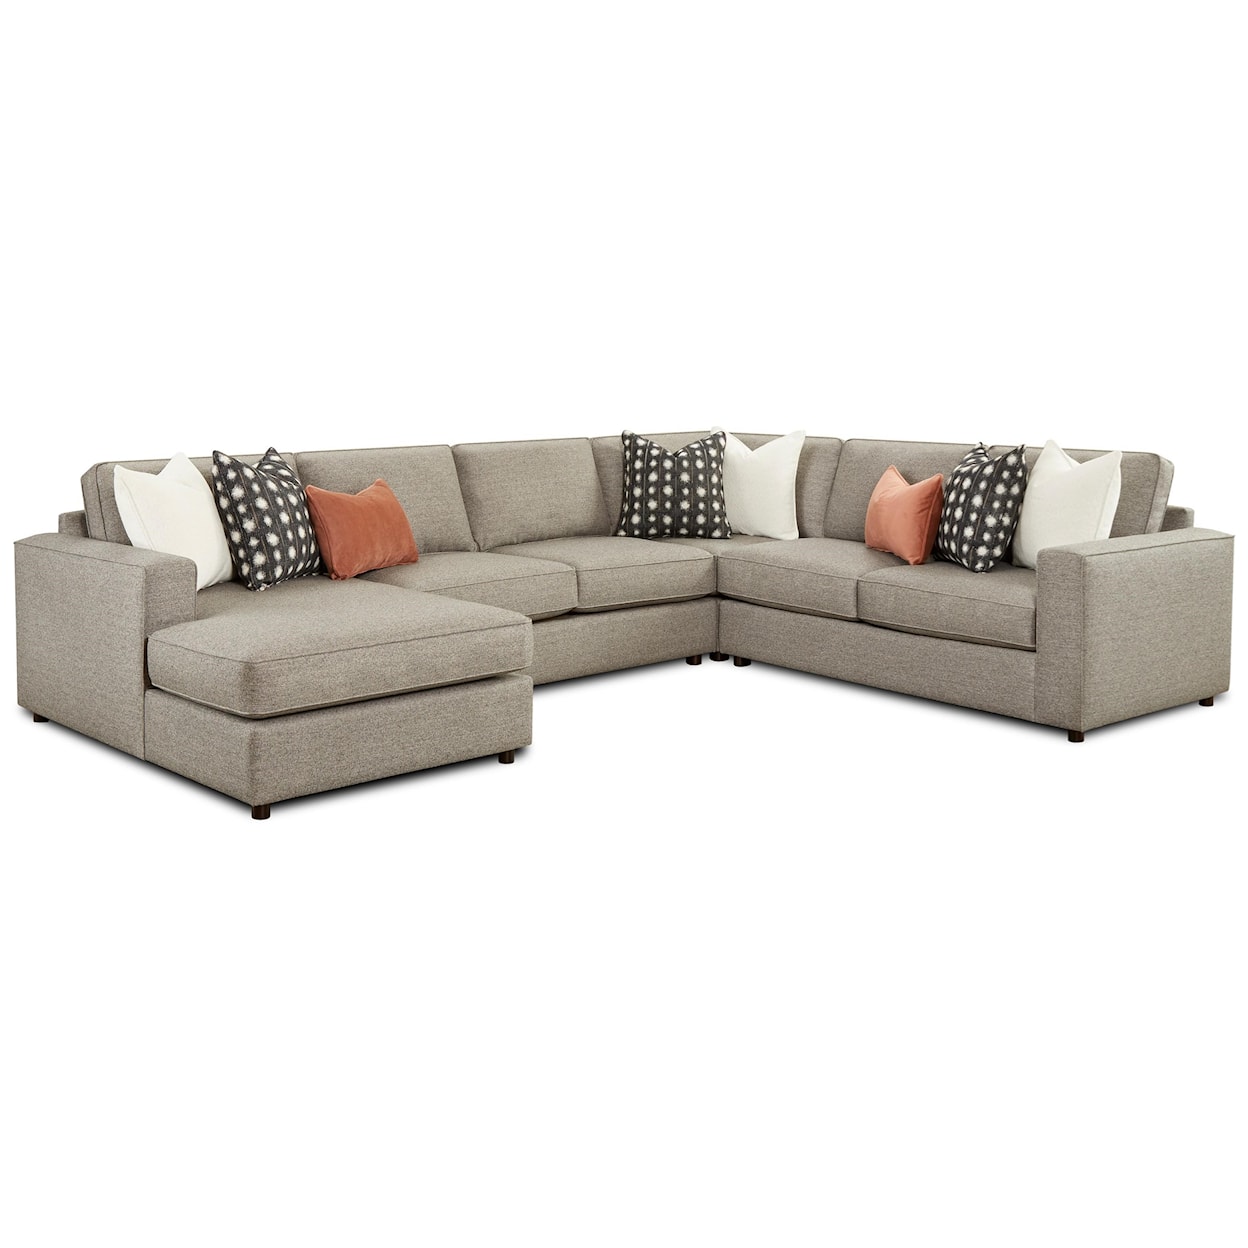 Fusion Furniture 2061 MONROE ASH 4-Piece Sectional with Chaise